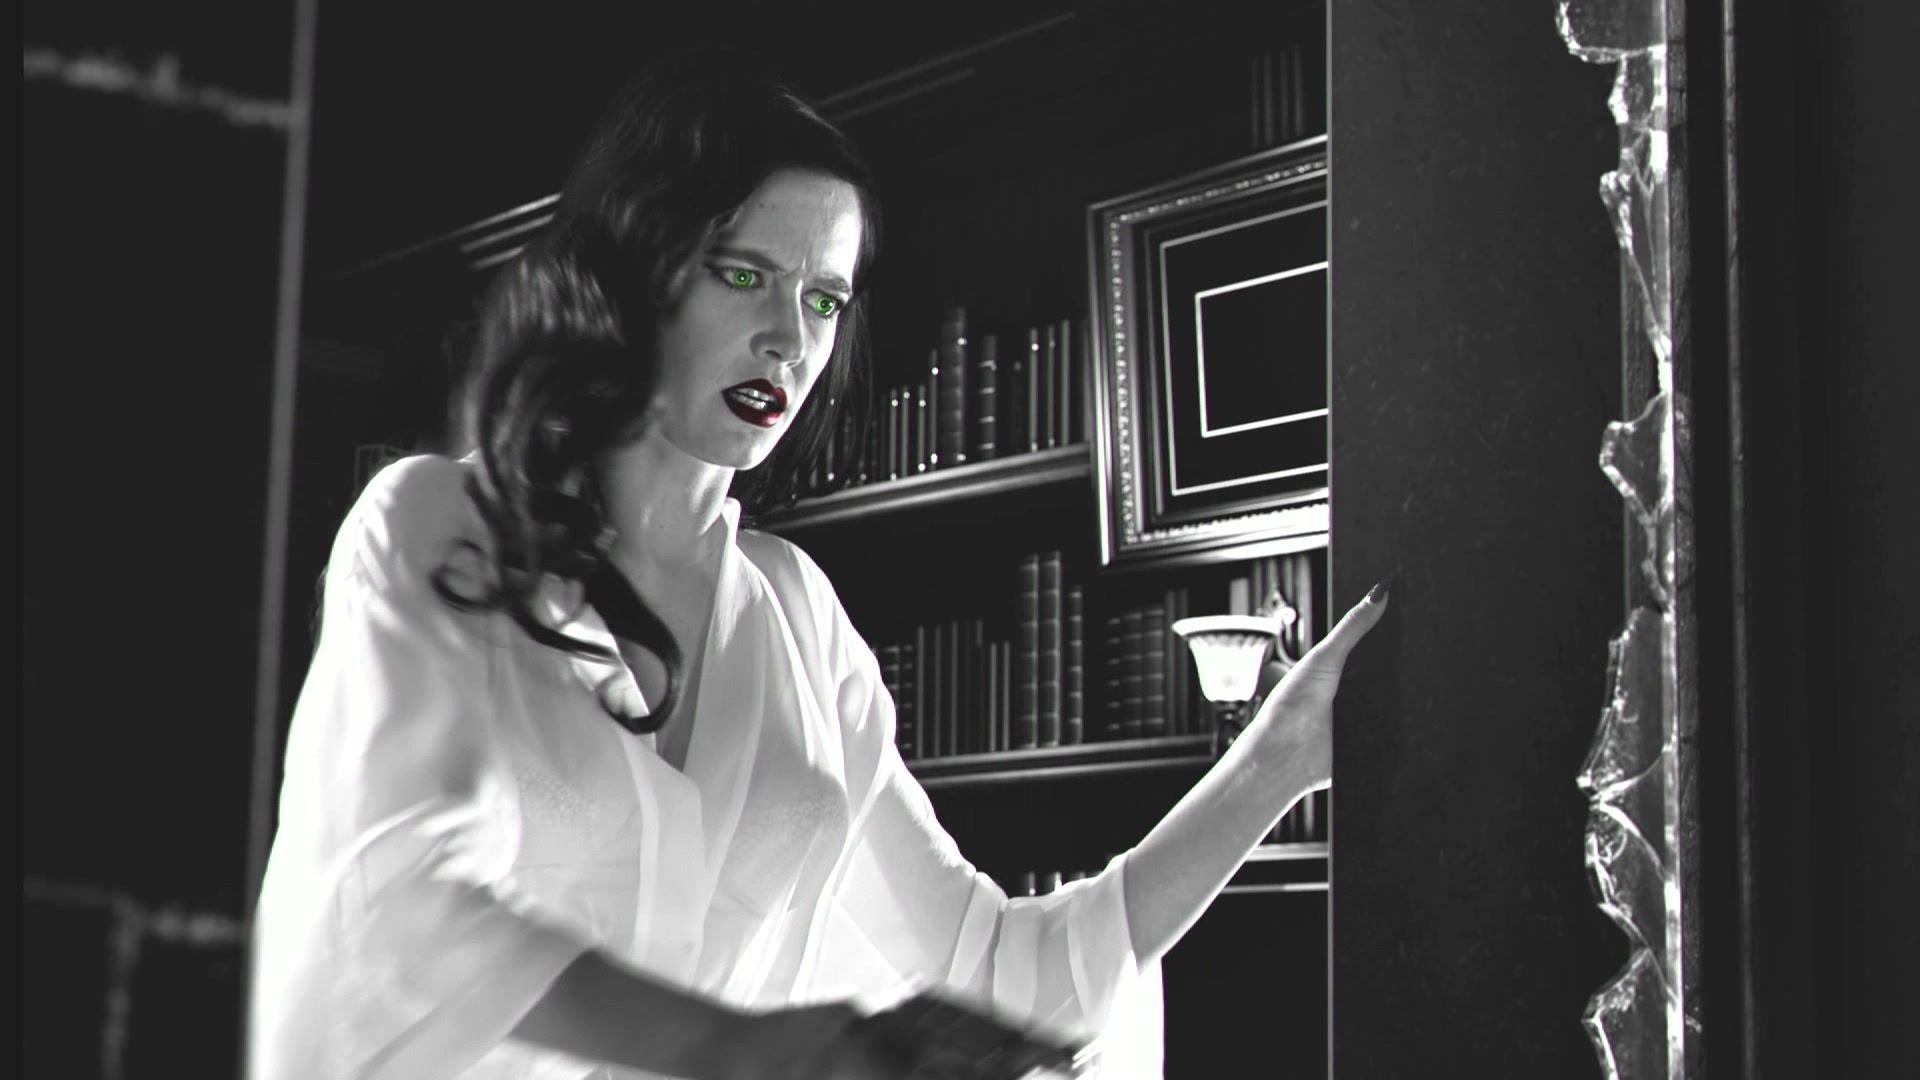 Les Eva Green - Sin City 2 - A Dame To Kill For (2014) Full HD 1080 BR (Sex, Nude, FF) Transsexual - 1